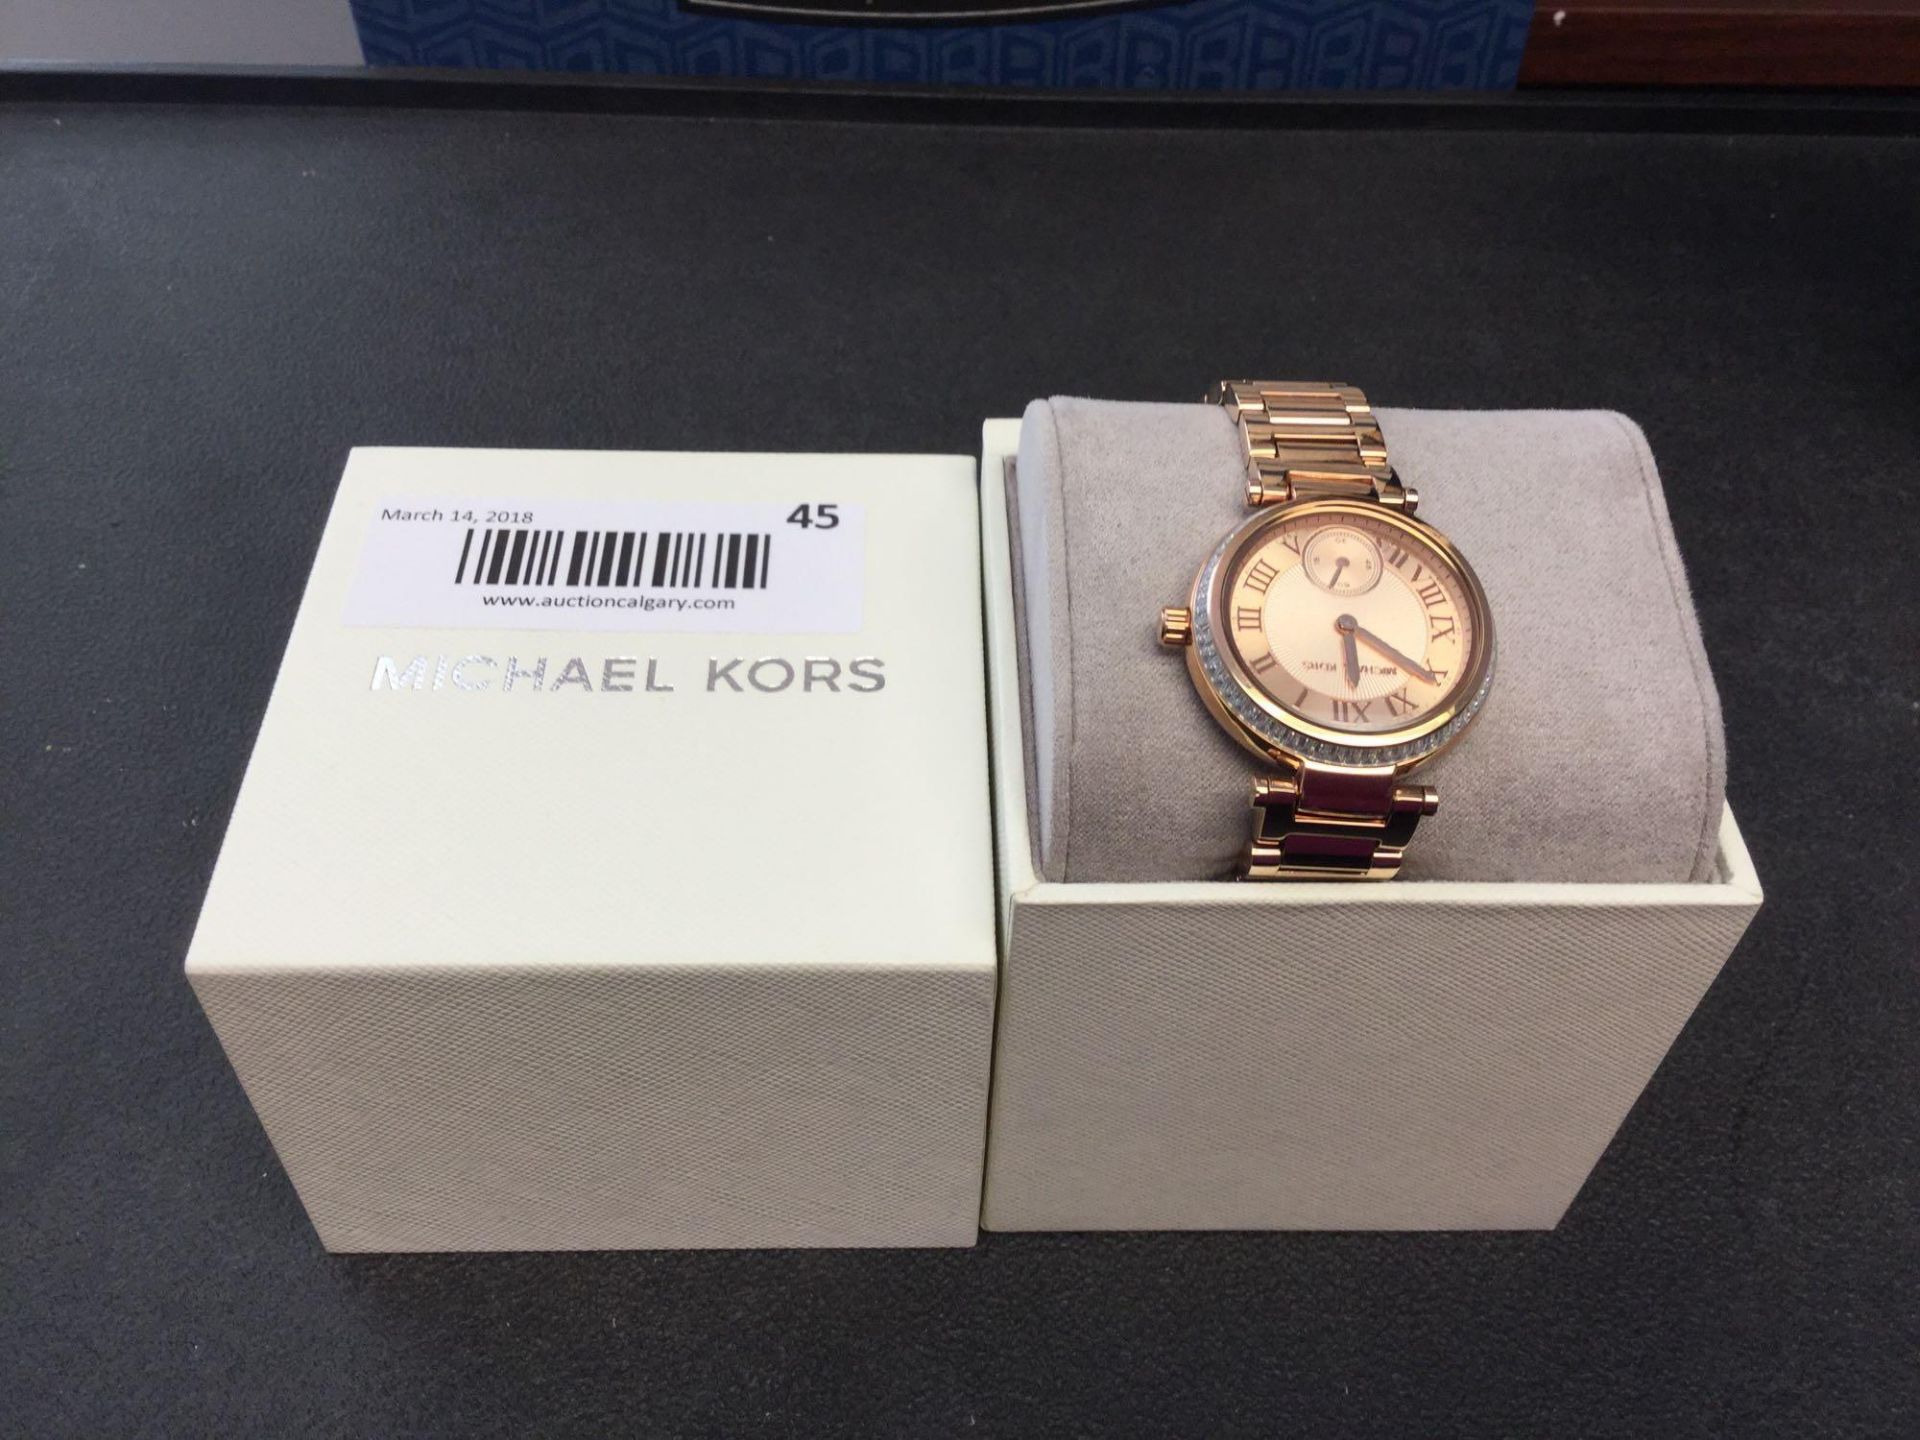 Michael Kors Woman's Watch - Crystals around Face- Coppertone Band